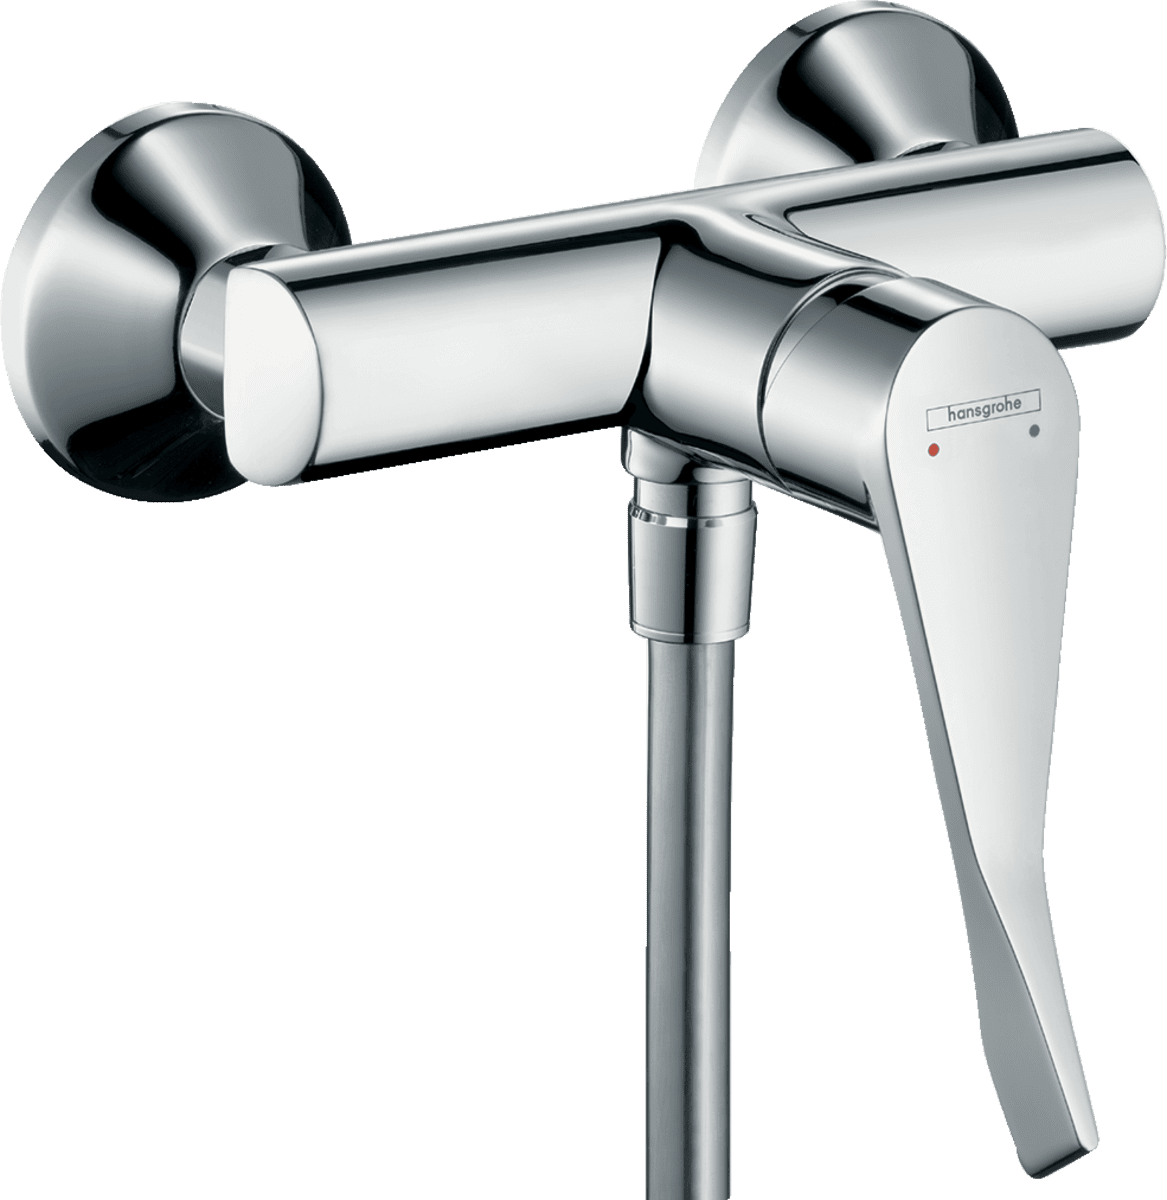 Picture of HANSGROHE Focus Single lever shower mixer for exposed installation with extra long handle 12,1 cm #31916000 - Chrome